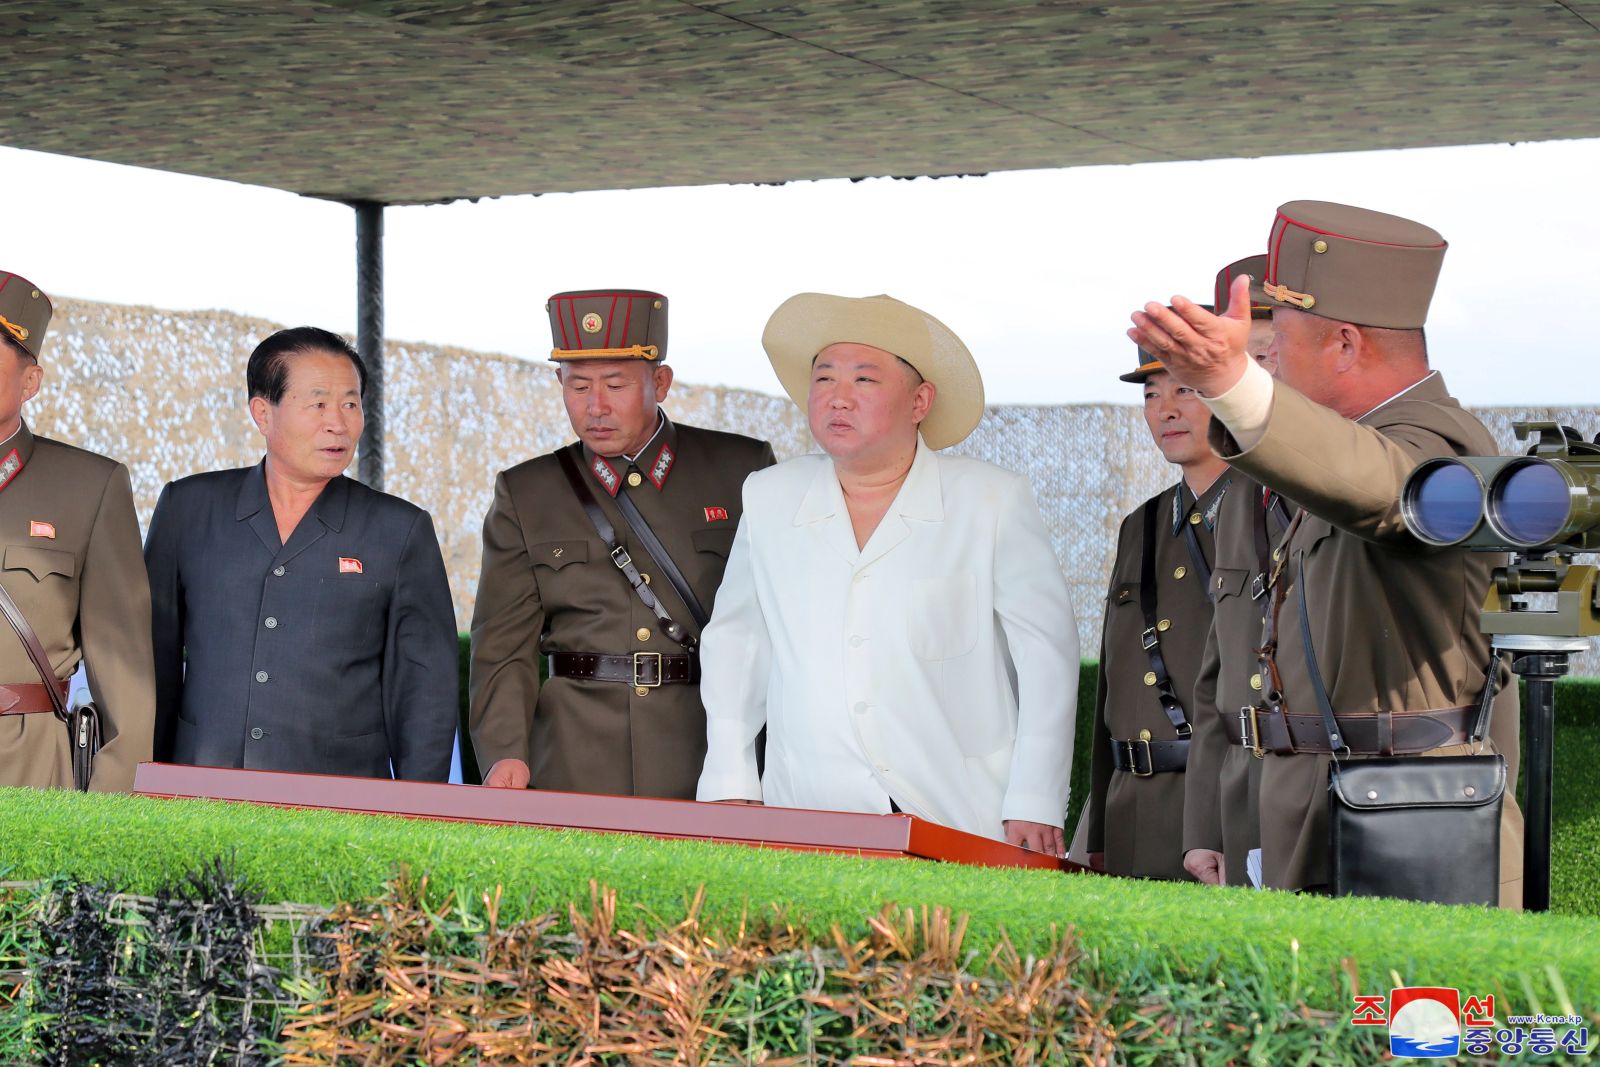 epa10233817 An undated photo released on 10 October 2022 by the official North Korean Central News Agency (KCNA) shows North Korean Supreme Leader Kim Jong-un (C) overseeing a military striking drill of long-range artillery sub-units on the front and flying corps of the Korean People's Army (KPA), carried out to check and assess the war deterrent and nuclear counterattack capability of the country, amid ongoing joint military exersizes involving US and South Korean forces in the waters near the Korean Penninsula. North Korea conducted the drills from 25 September to 09 October, and launched several ballistic missiles in order to test the efficacy of the nation's tactical nuclear warefare capabilities.  EPA/KCNA   EDITORIAL USE ONLY